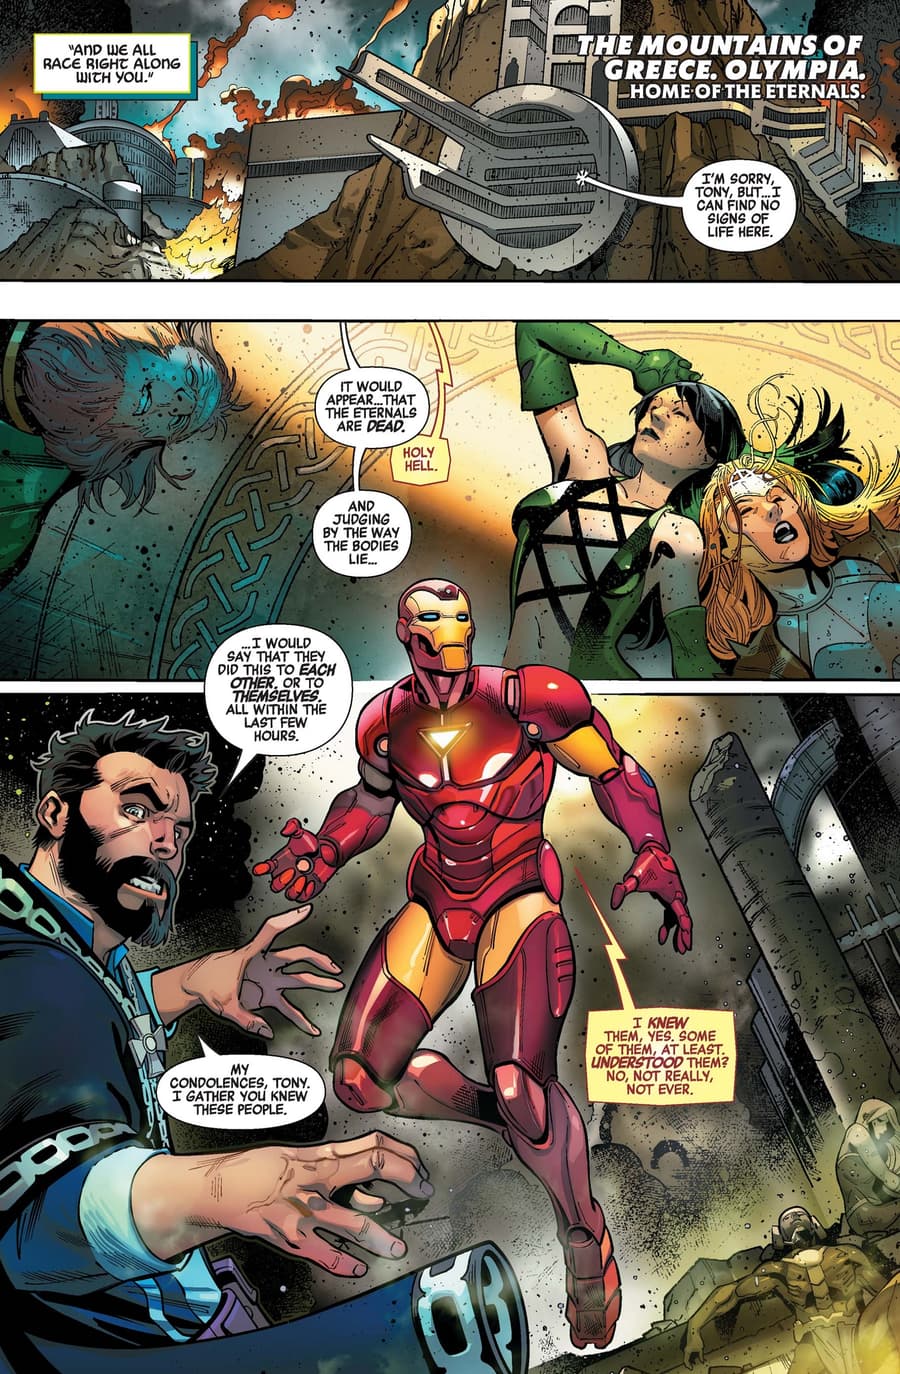 The death of the Eternals in AVENGERS (2018) #4.